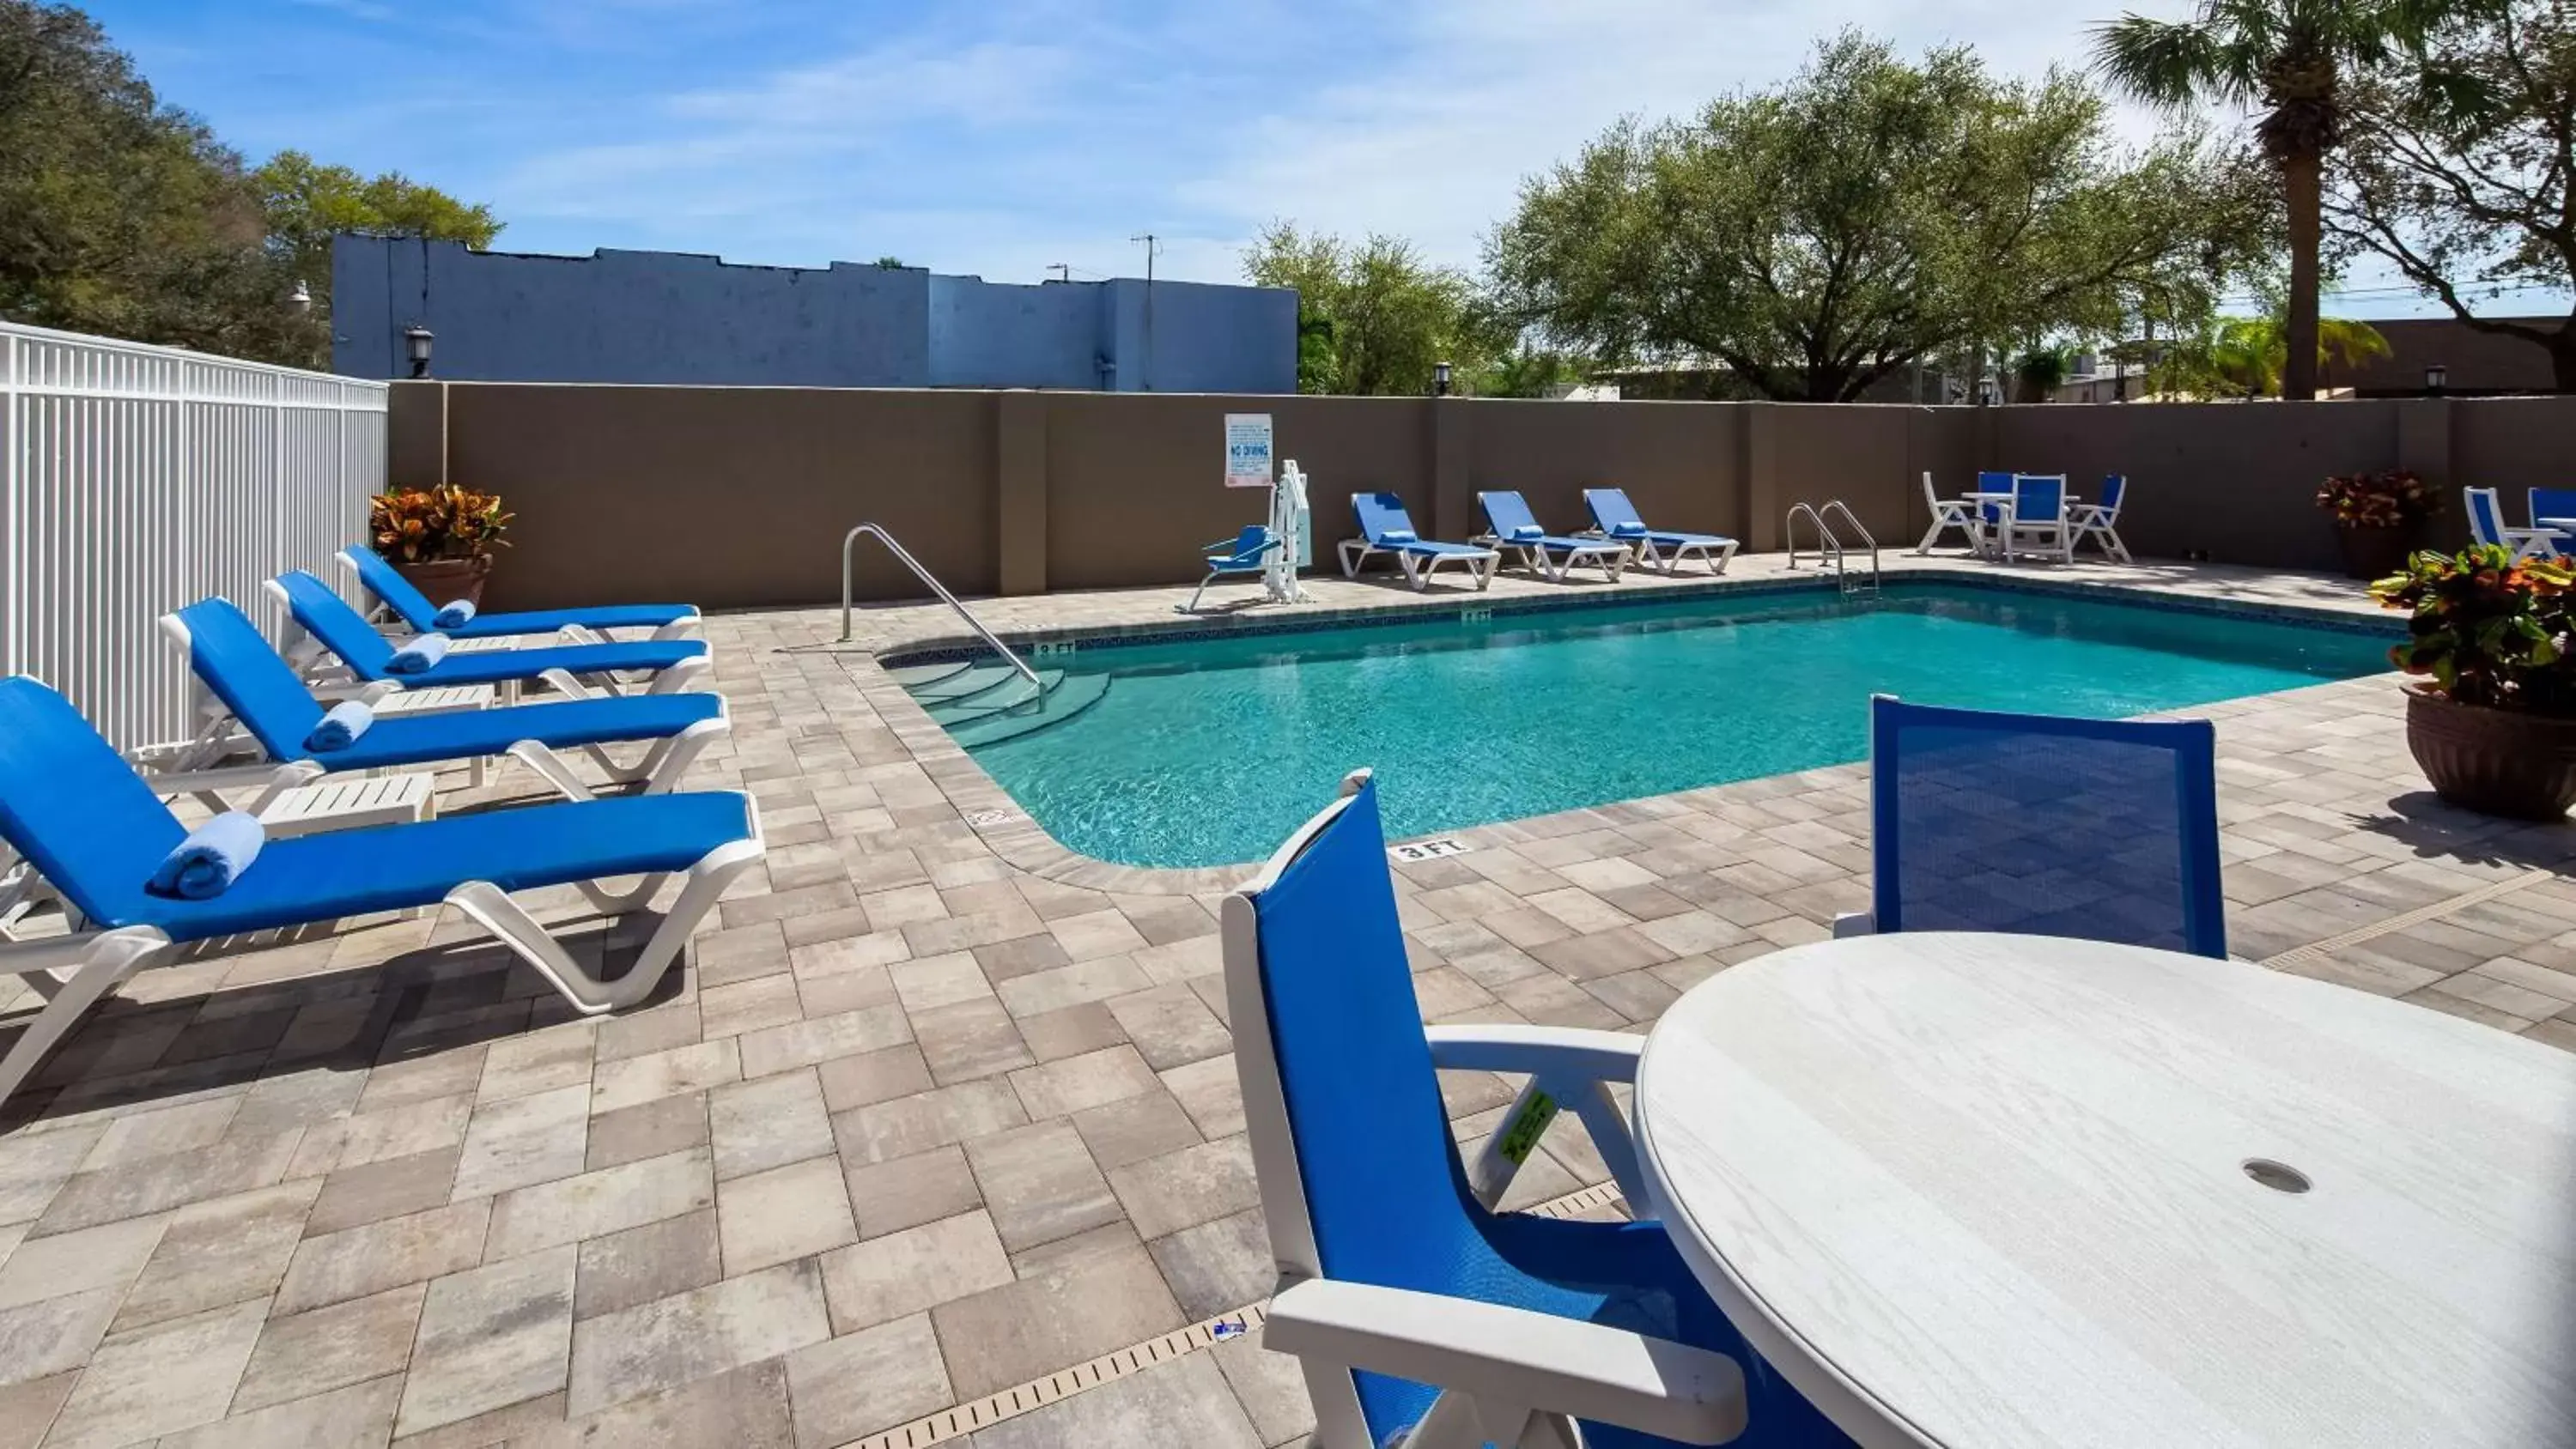 On site, Swimming Pool in Best Western Tampa